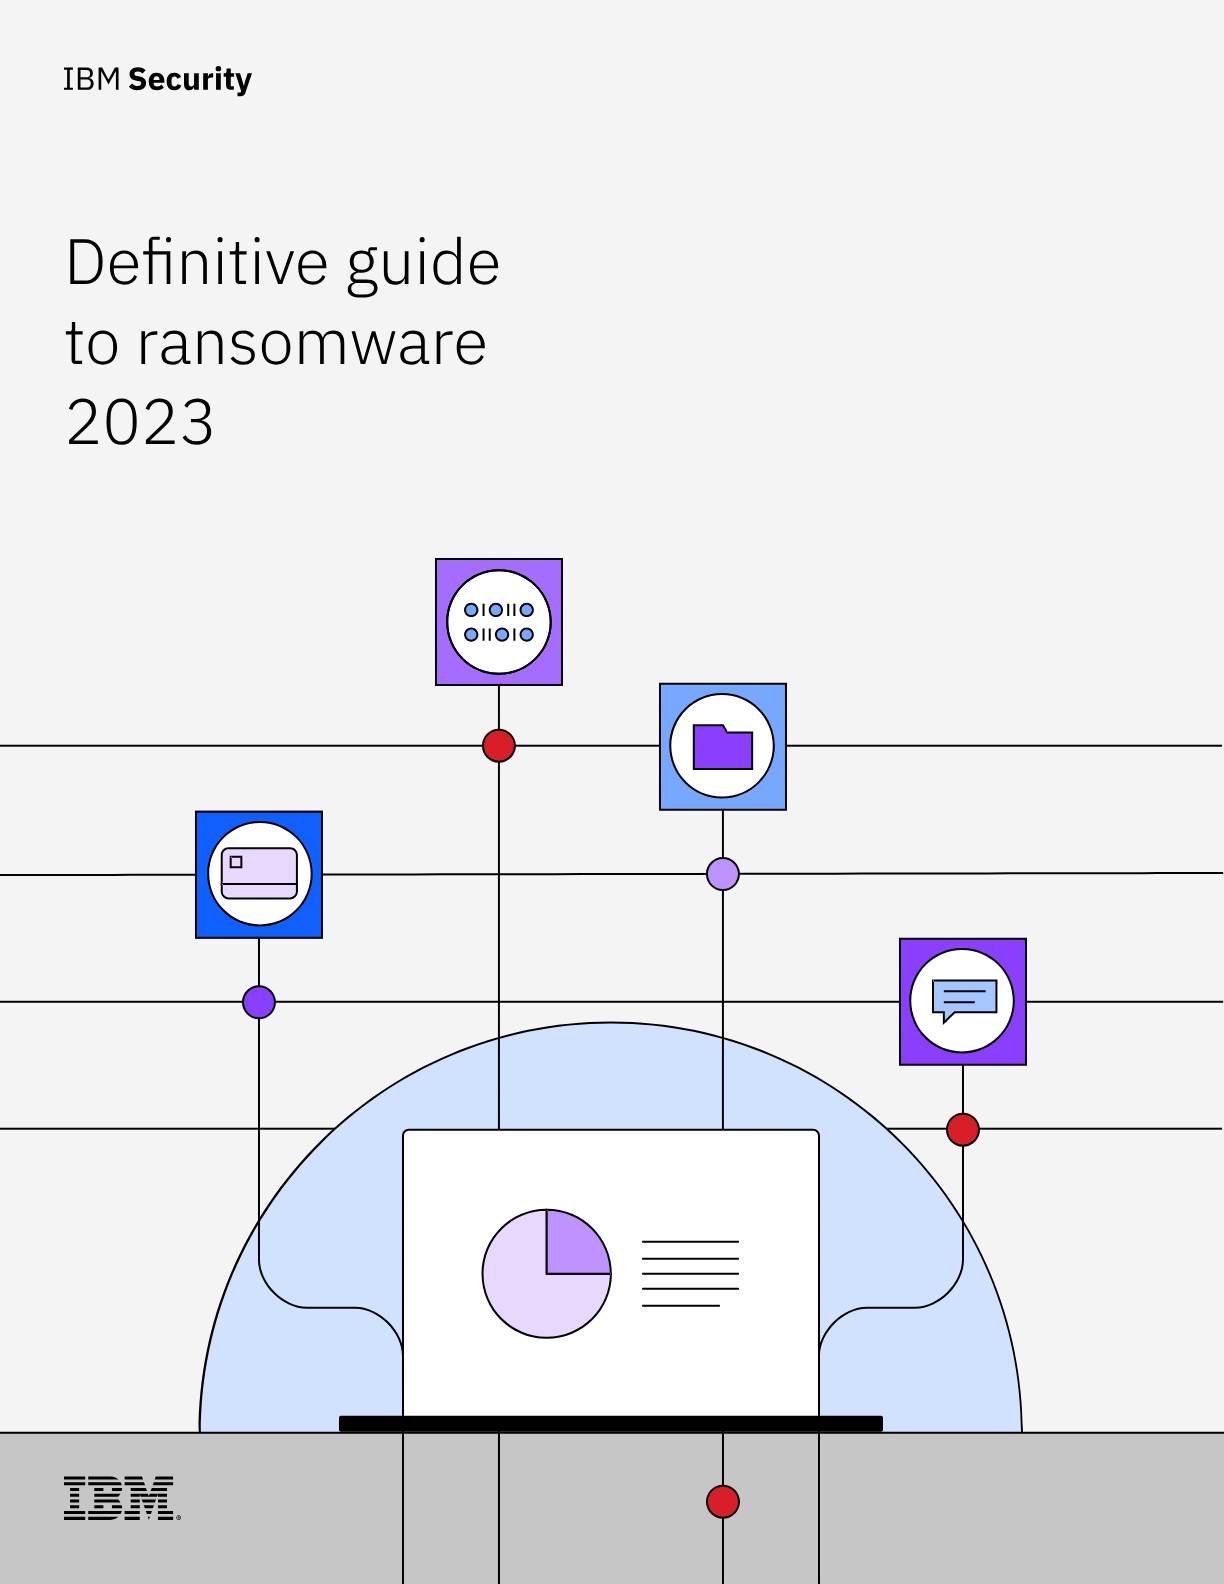 IBM whitepaper Definitive guide to ransomware 2023